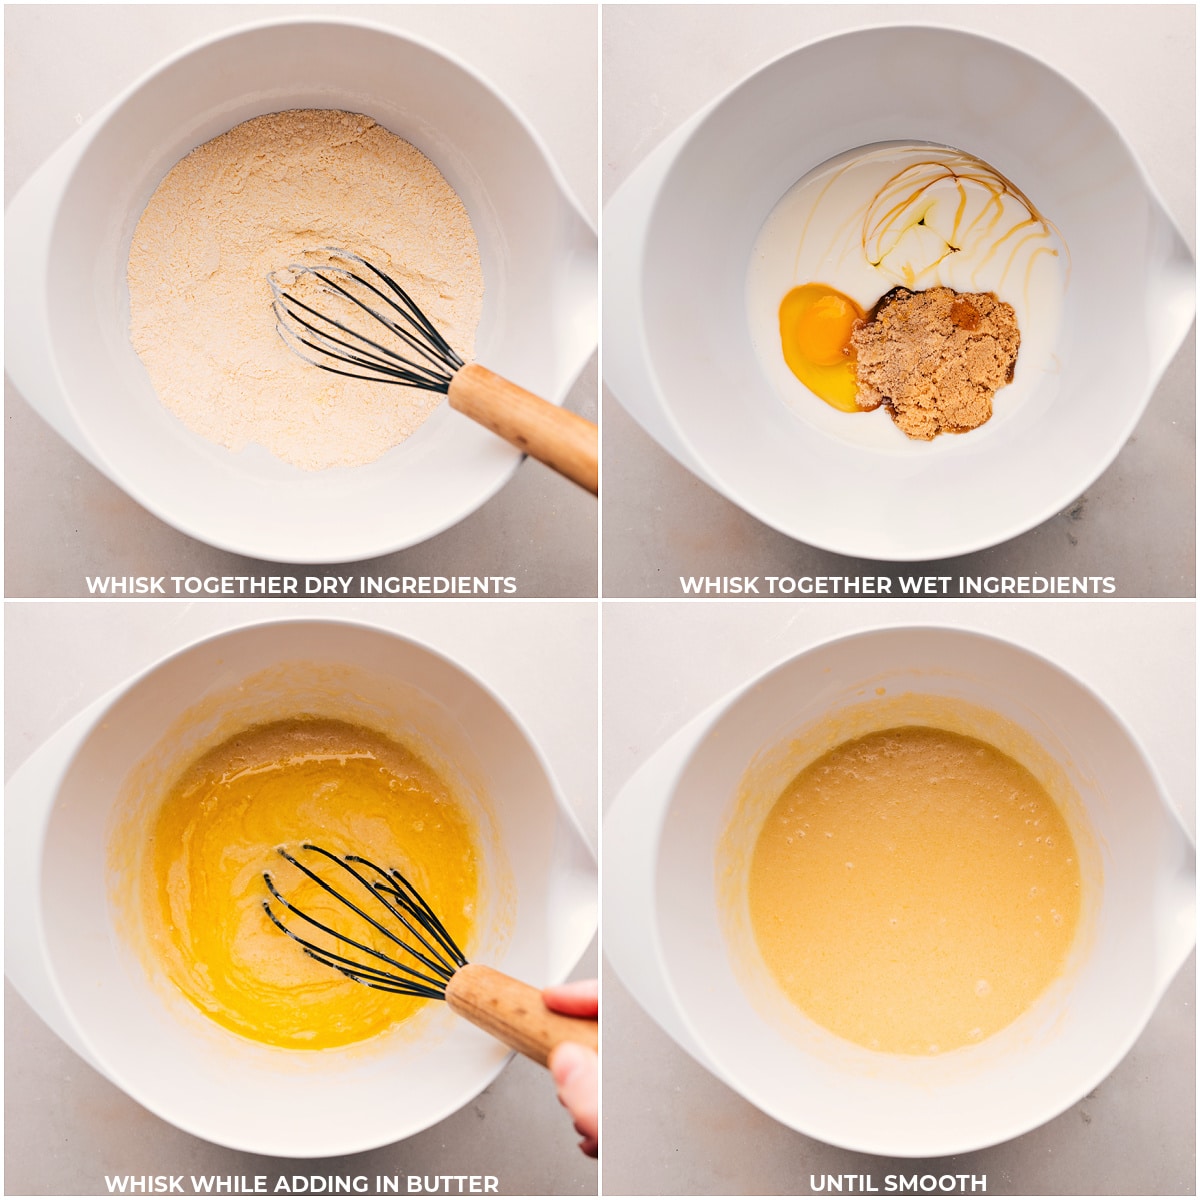 Whisking dry ingredients until combined, followed by adding wet ingredients and whisking until the mixture is smooth.